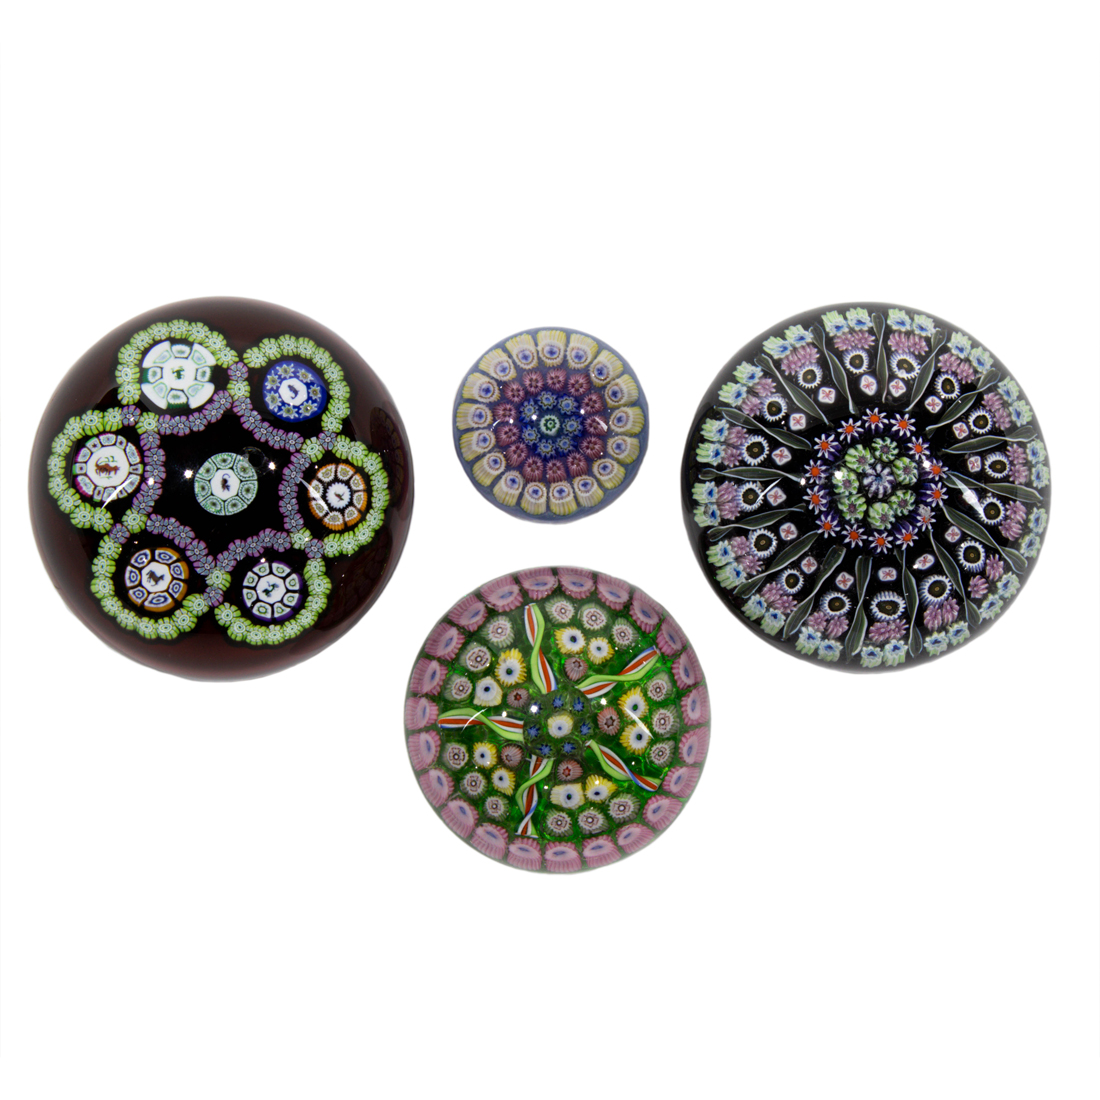  LOT OF 4 MILLEFIORE GLASS PAPERWEIGHTS 2d194f